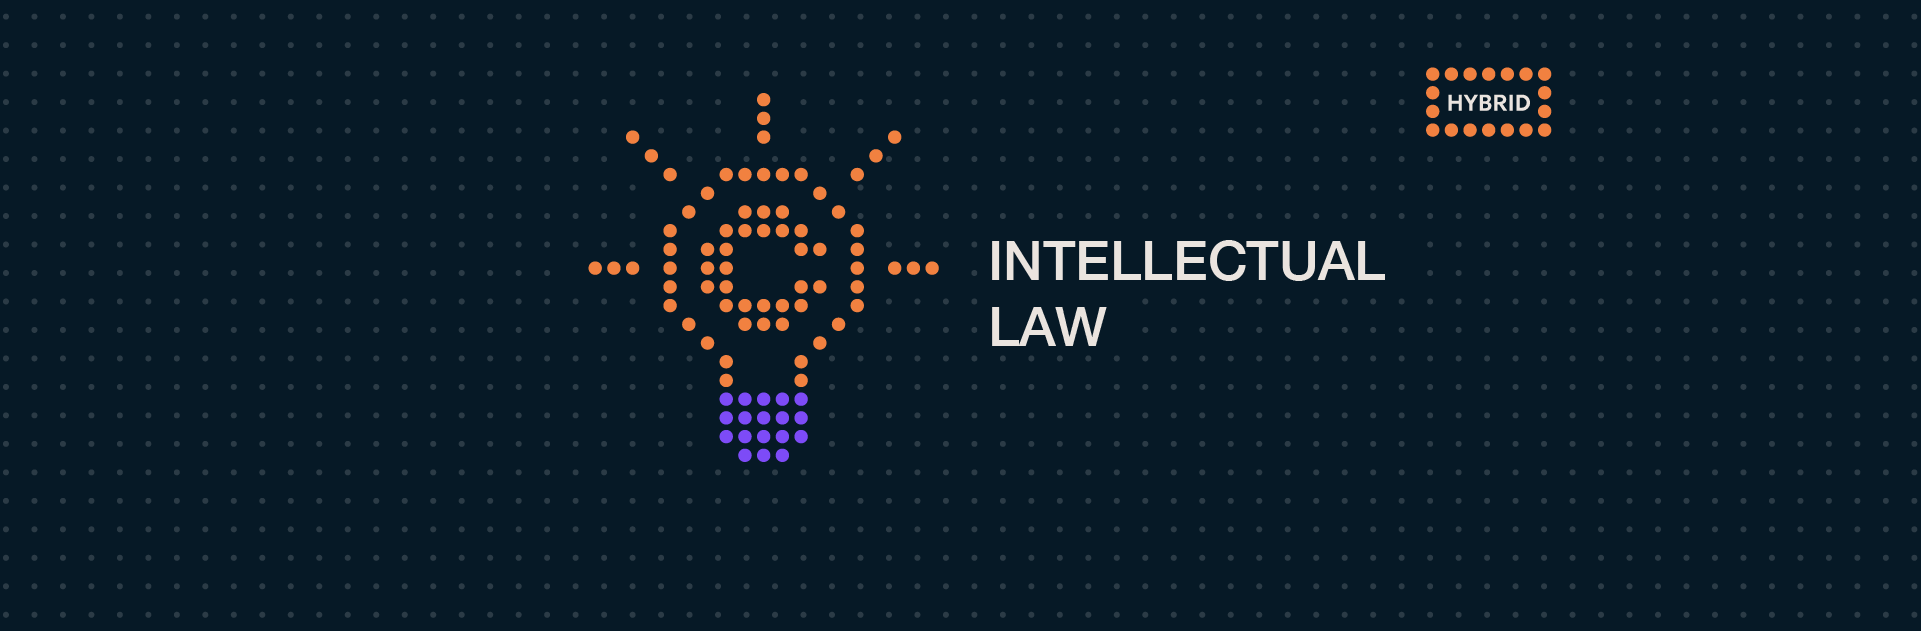 Intellectual Law for Creative Industry Representatives